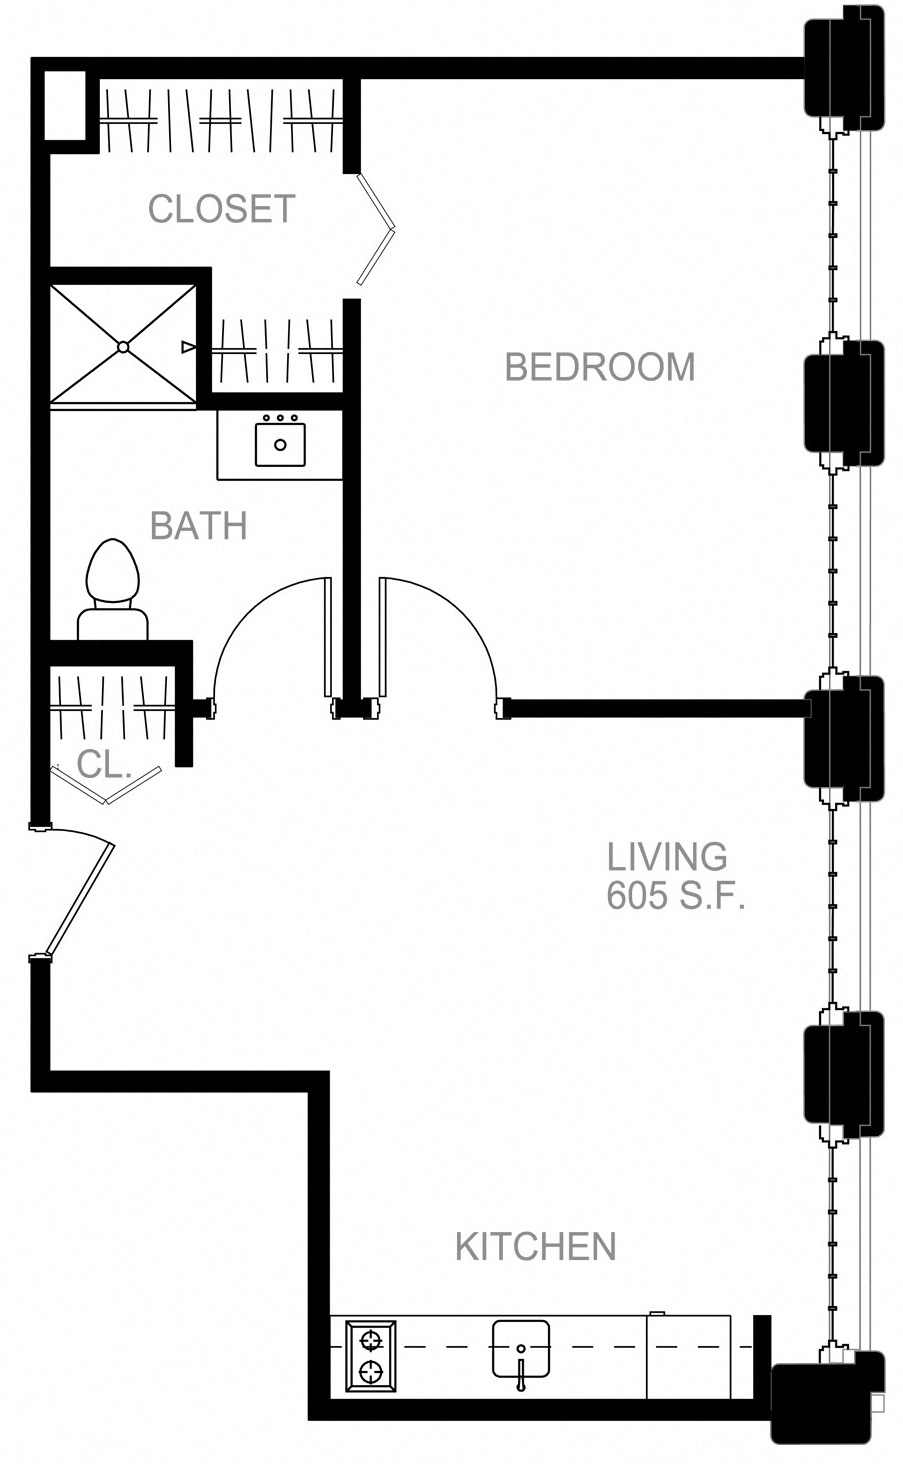 Floorplan for Apartment #S2406, 1 bedroom unit at Halstead Providence